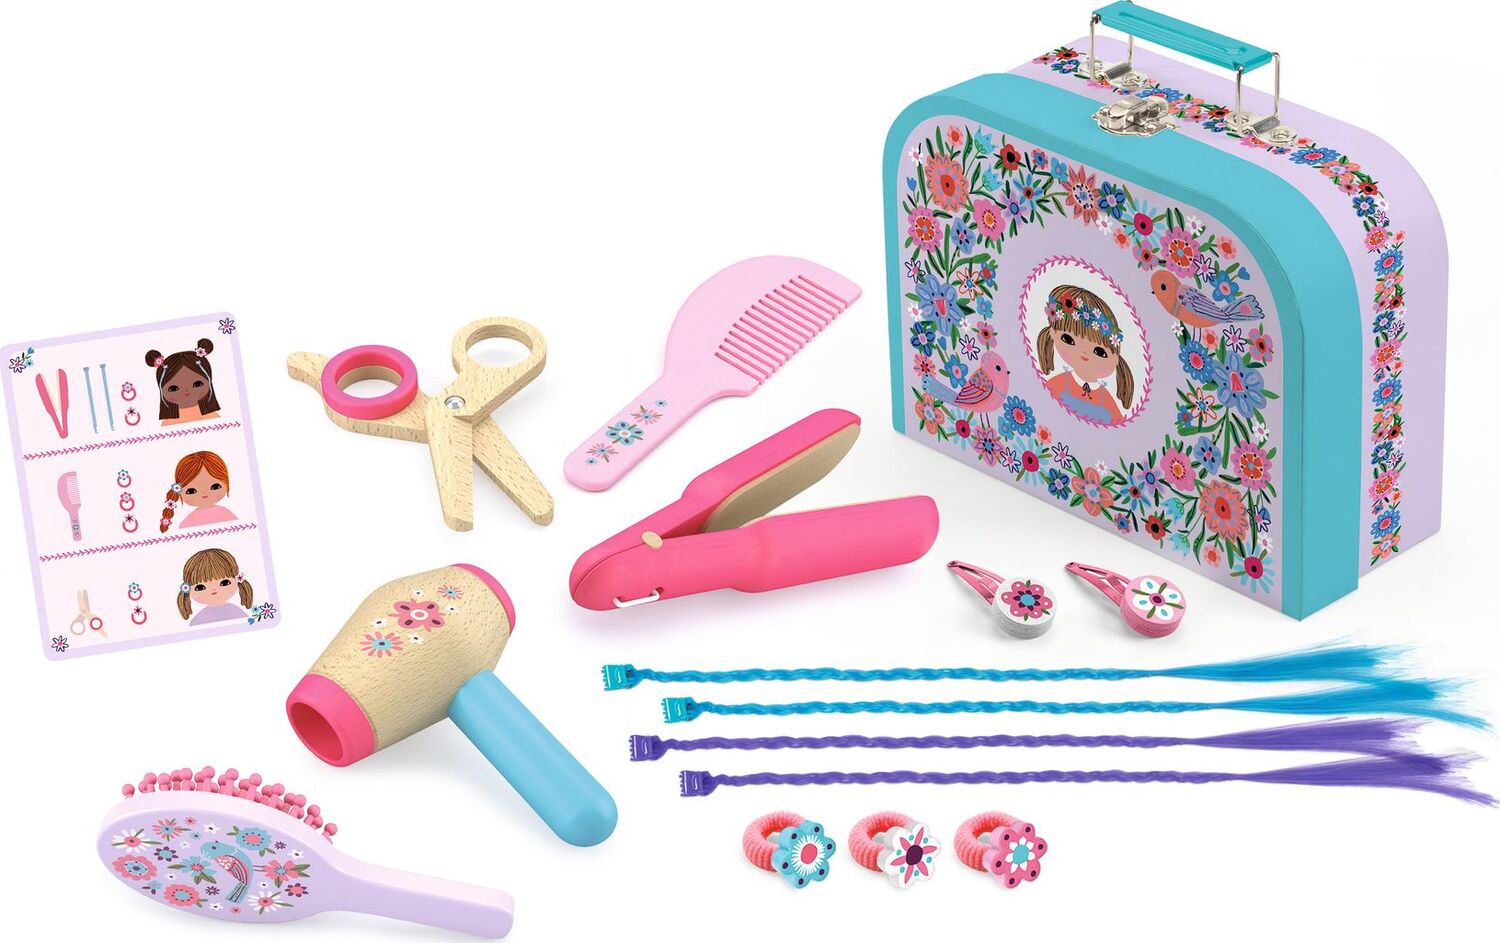 DJECO Lily Hairdressing Play Set